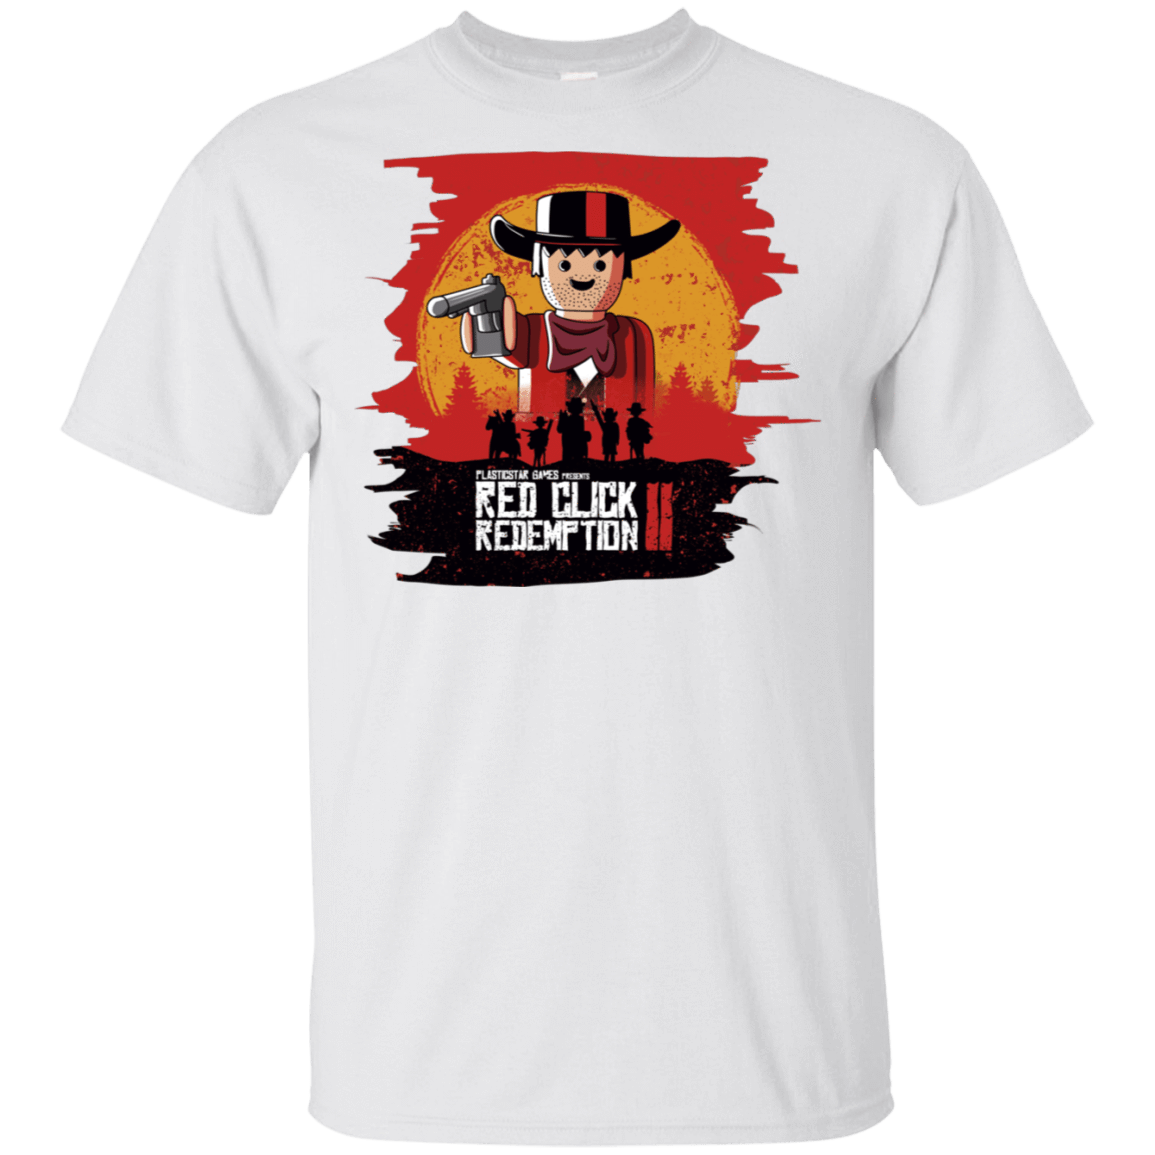 T-Shirts White / S Red Click Redemption T-Shirt